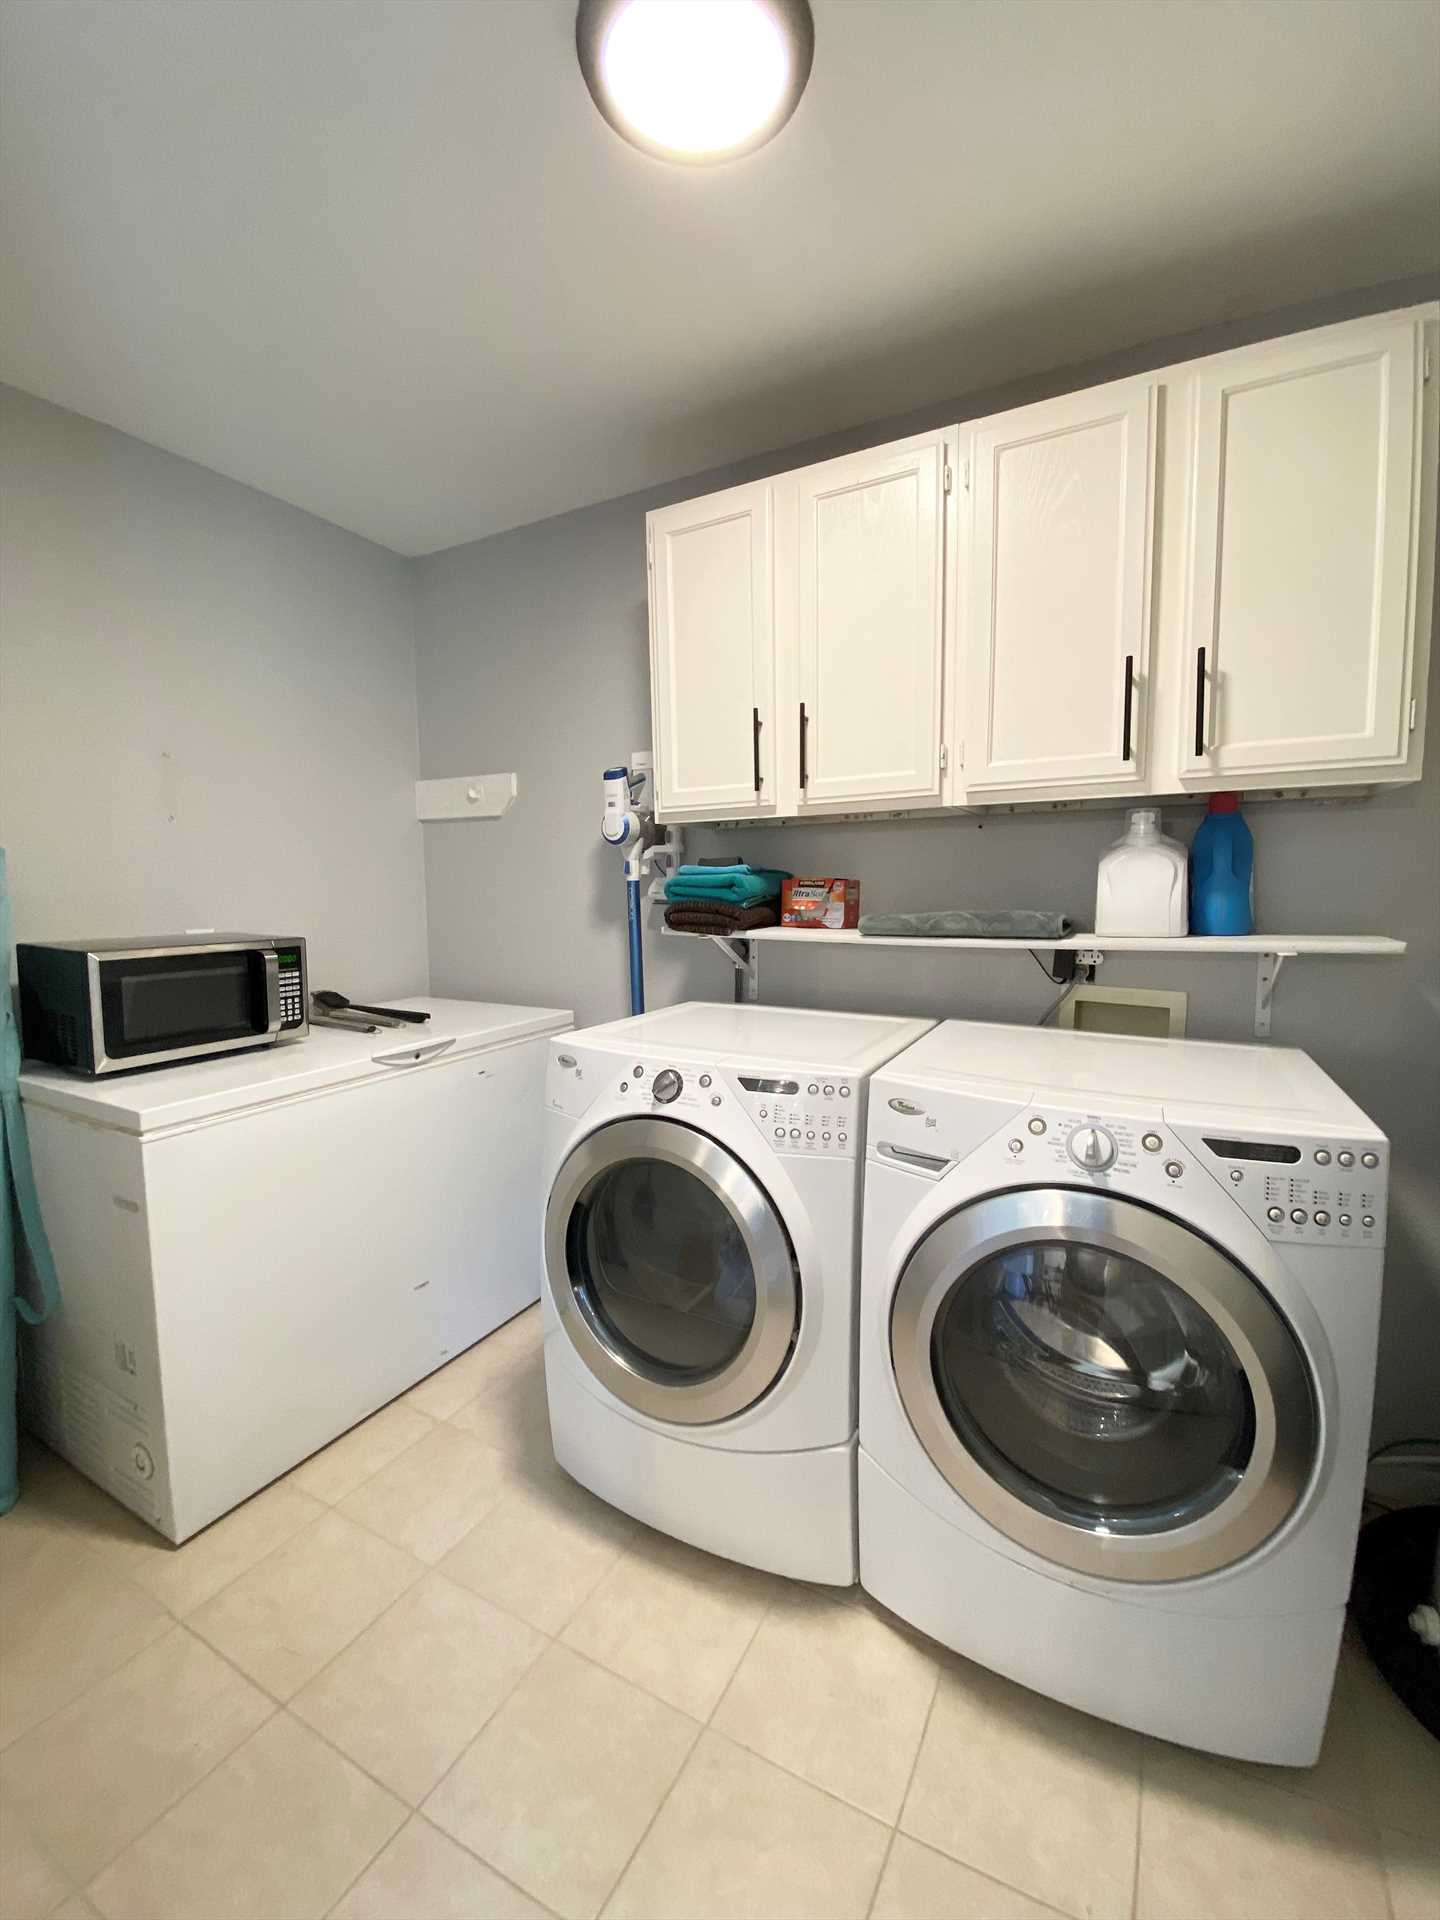                                                 With a convenient utility room, you won't have to worry about laundry piling up!